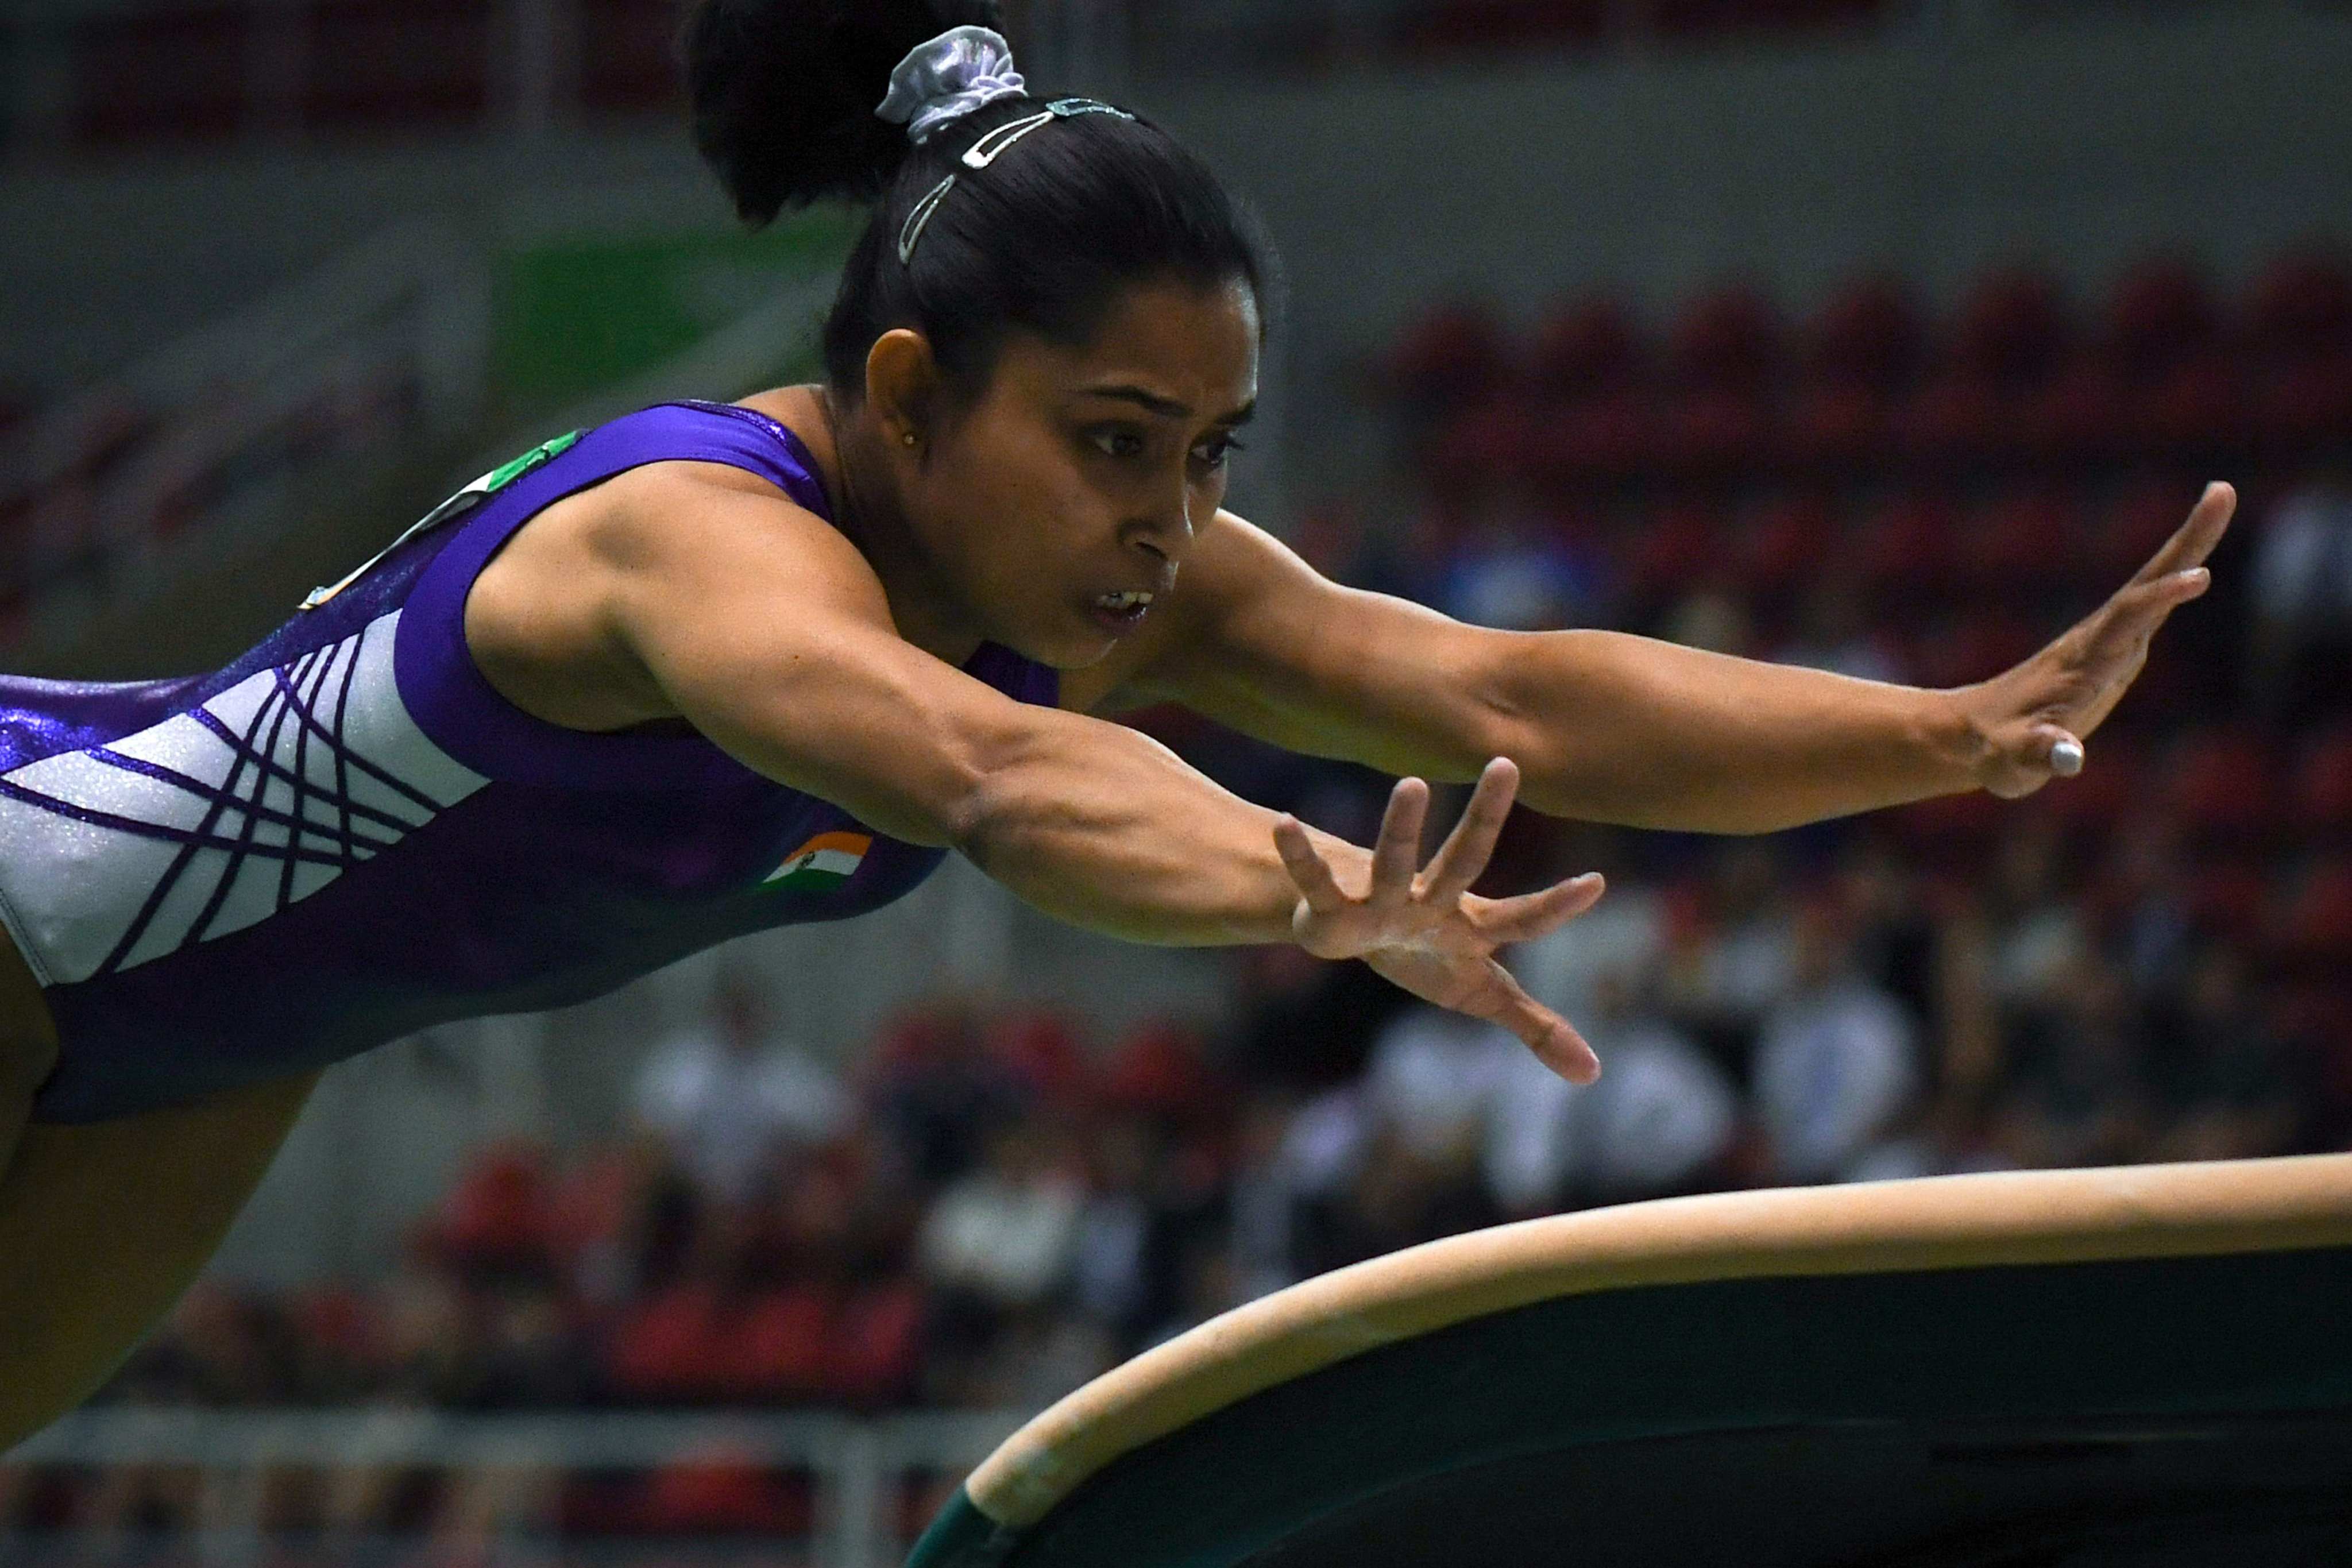 India’s Dipa Karmakar competes wearing Li-Ning sportswear during the artistic gymnastics test event for the Rio 2016 Olympic Games. Photo: AFP